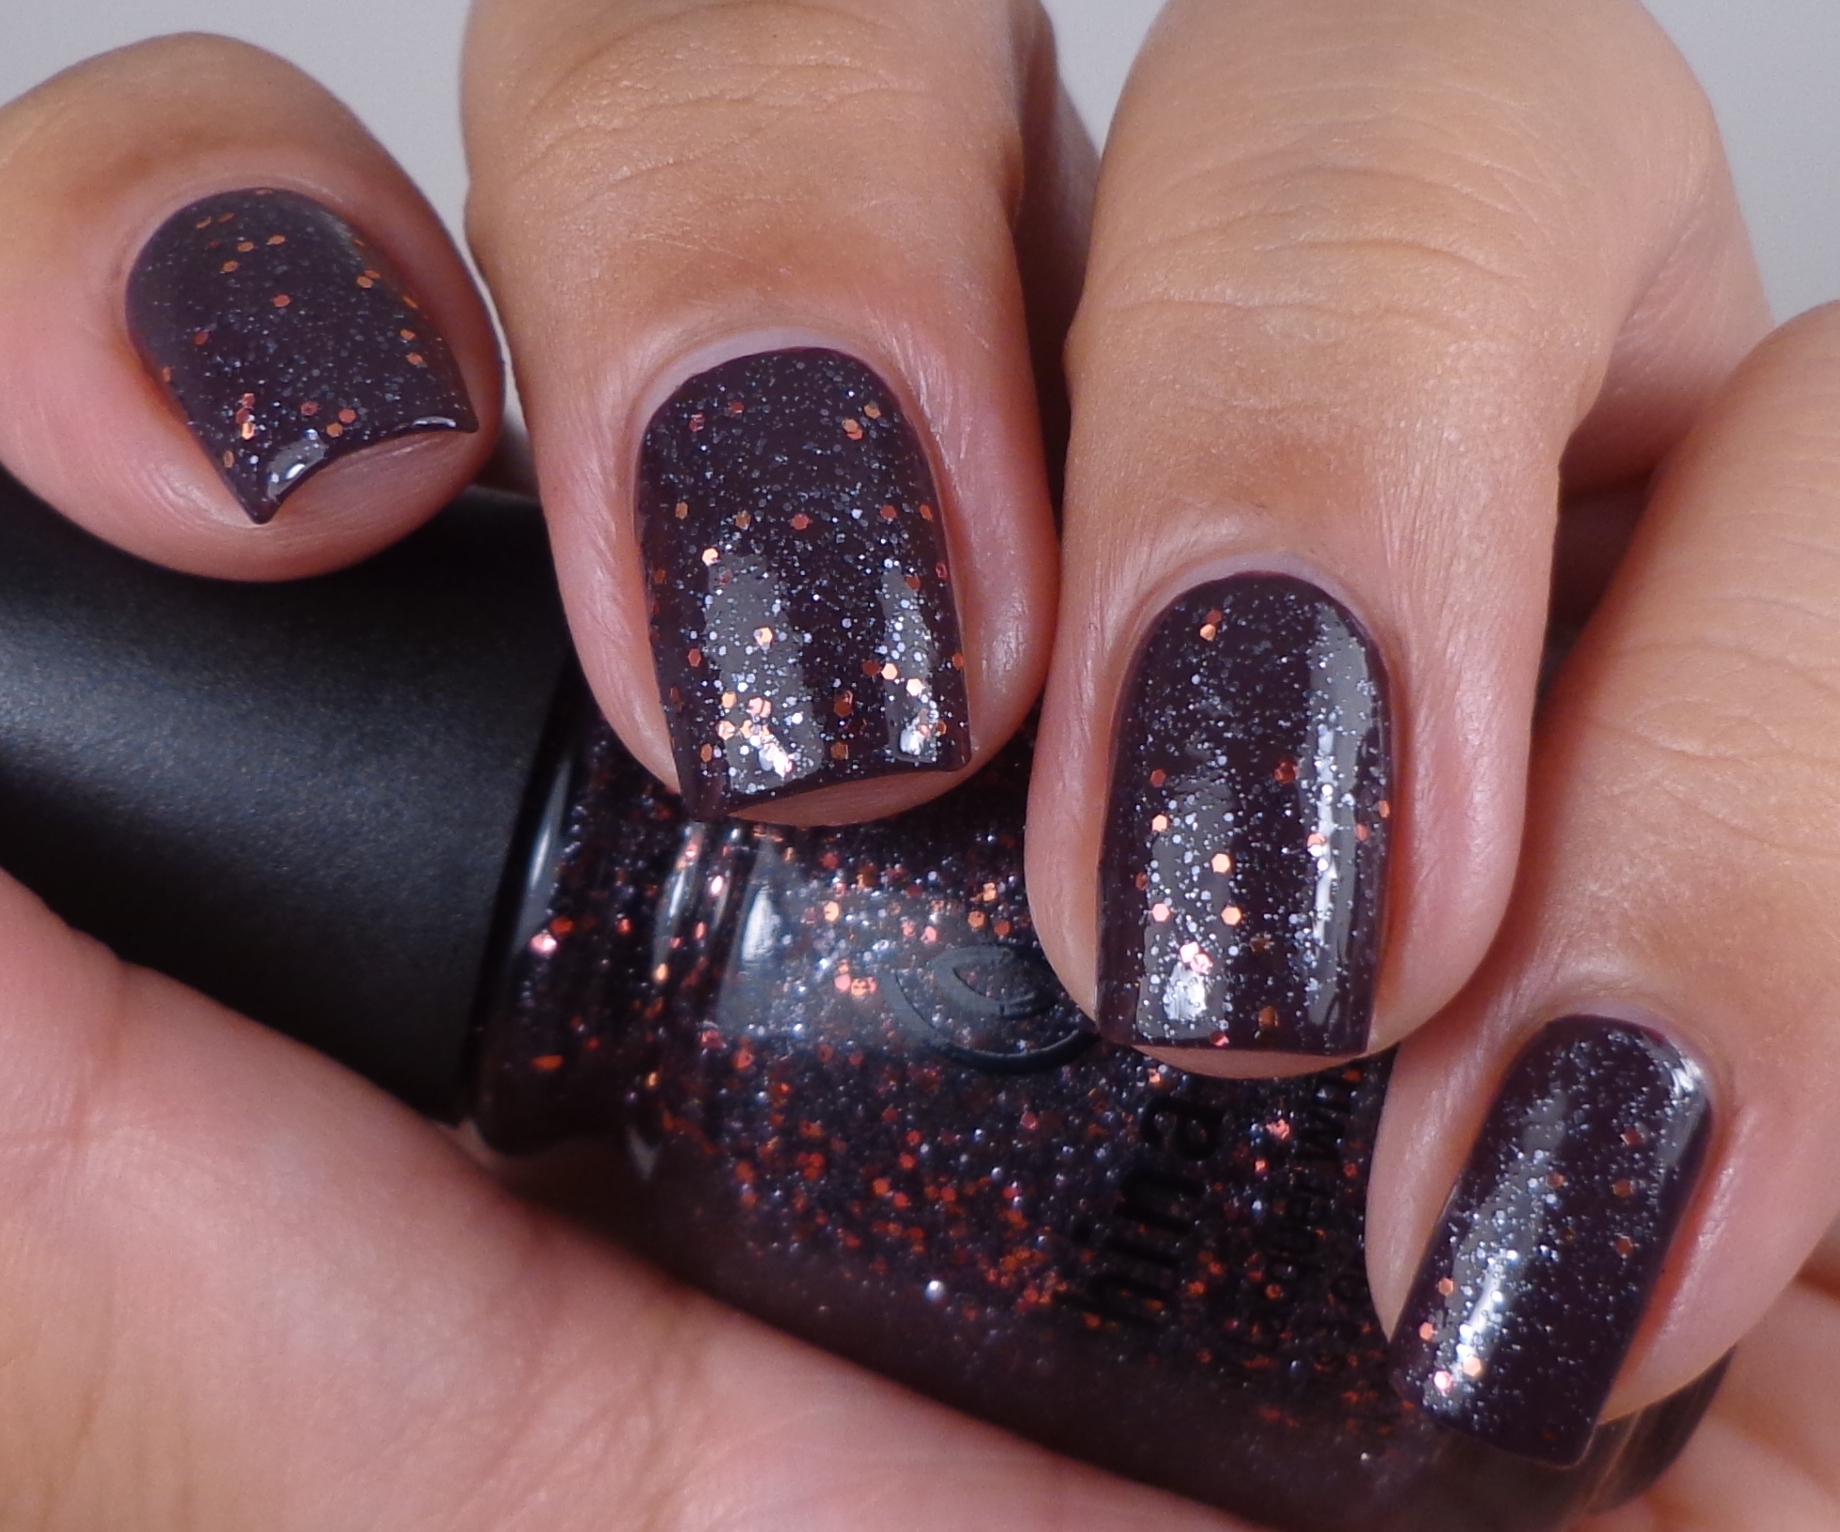 China Glaze Loco-motive 1 over What Are You A-freight Of